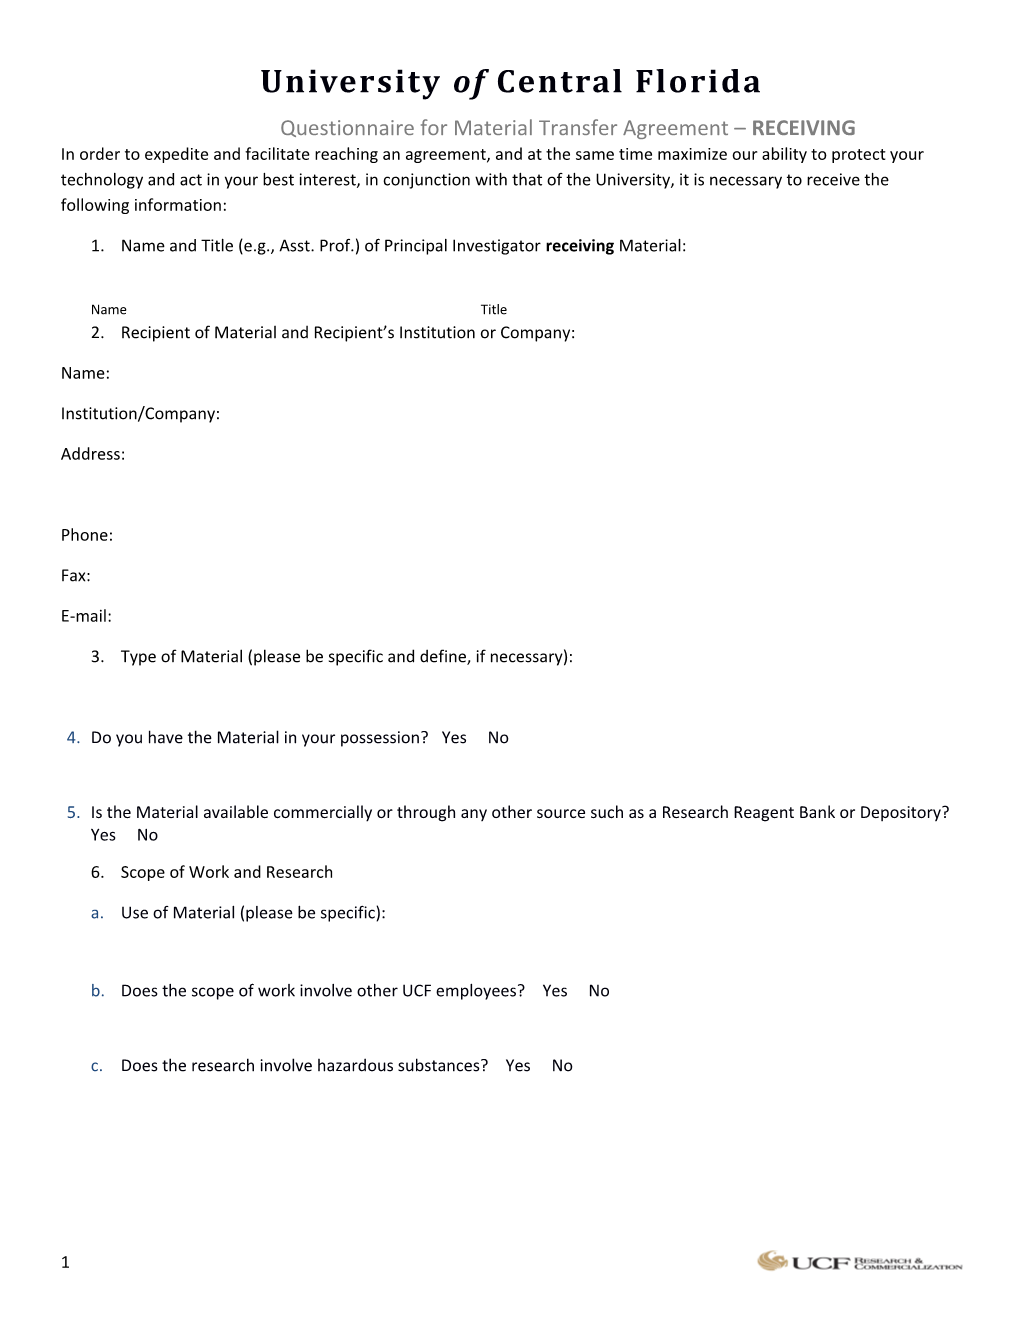 Questionnaire for Material Transfer Agreement RECEIVING